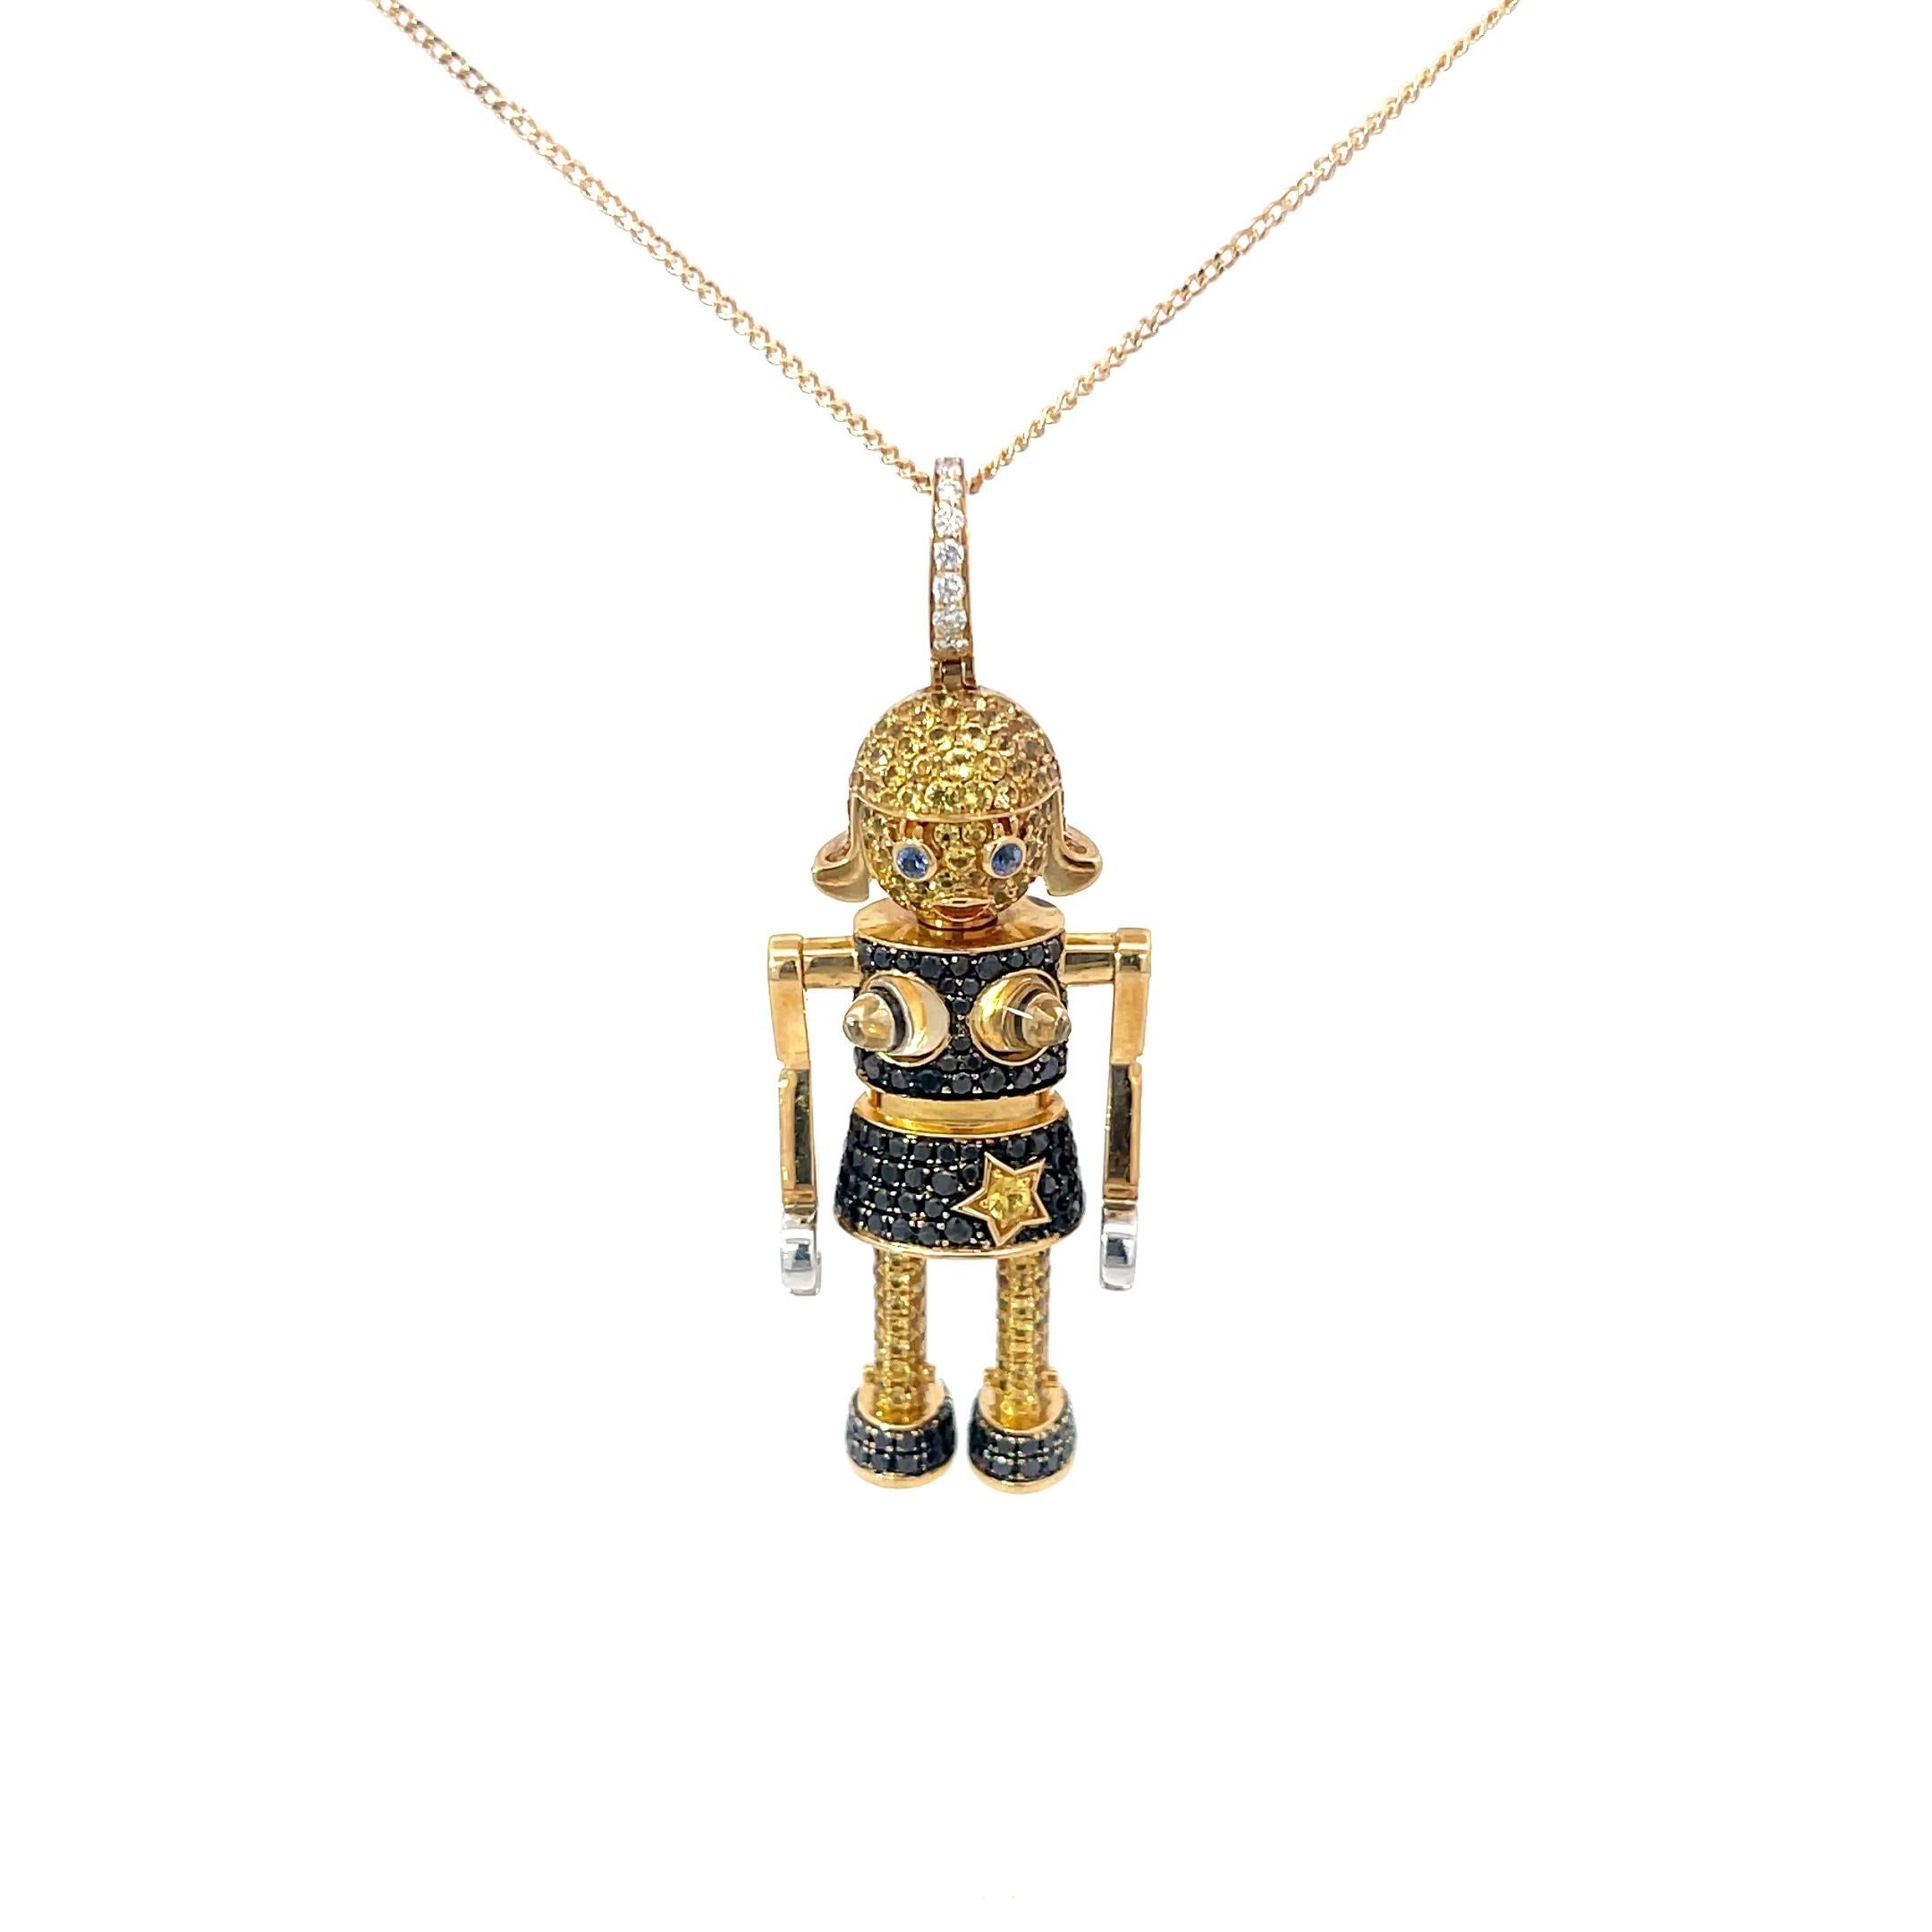 Pre-Owned Qeelin 18K Yellow Gold With Black Diamonds Roobot Pendant
Chain Sold Separated